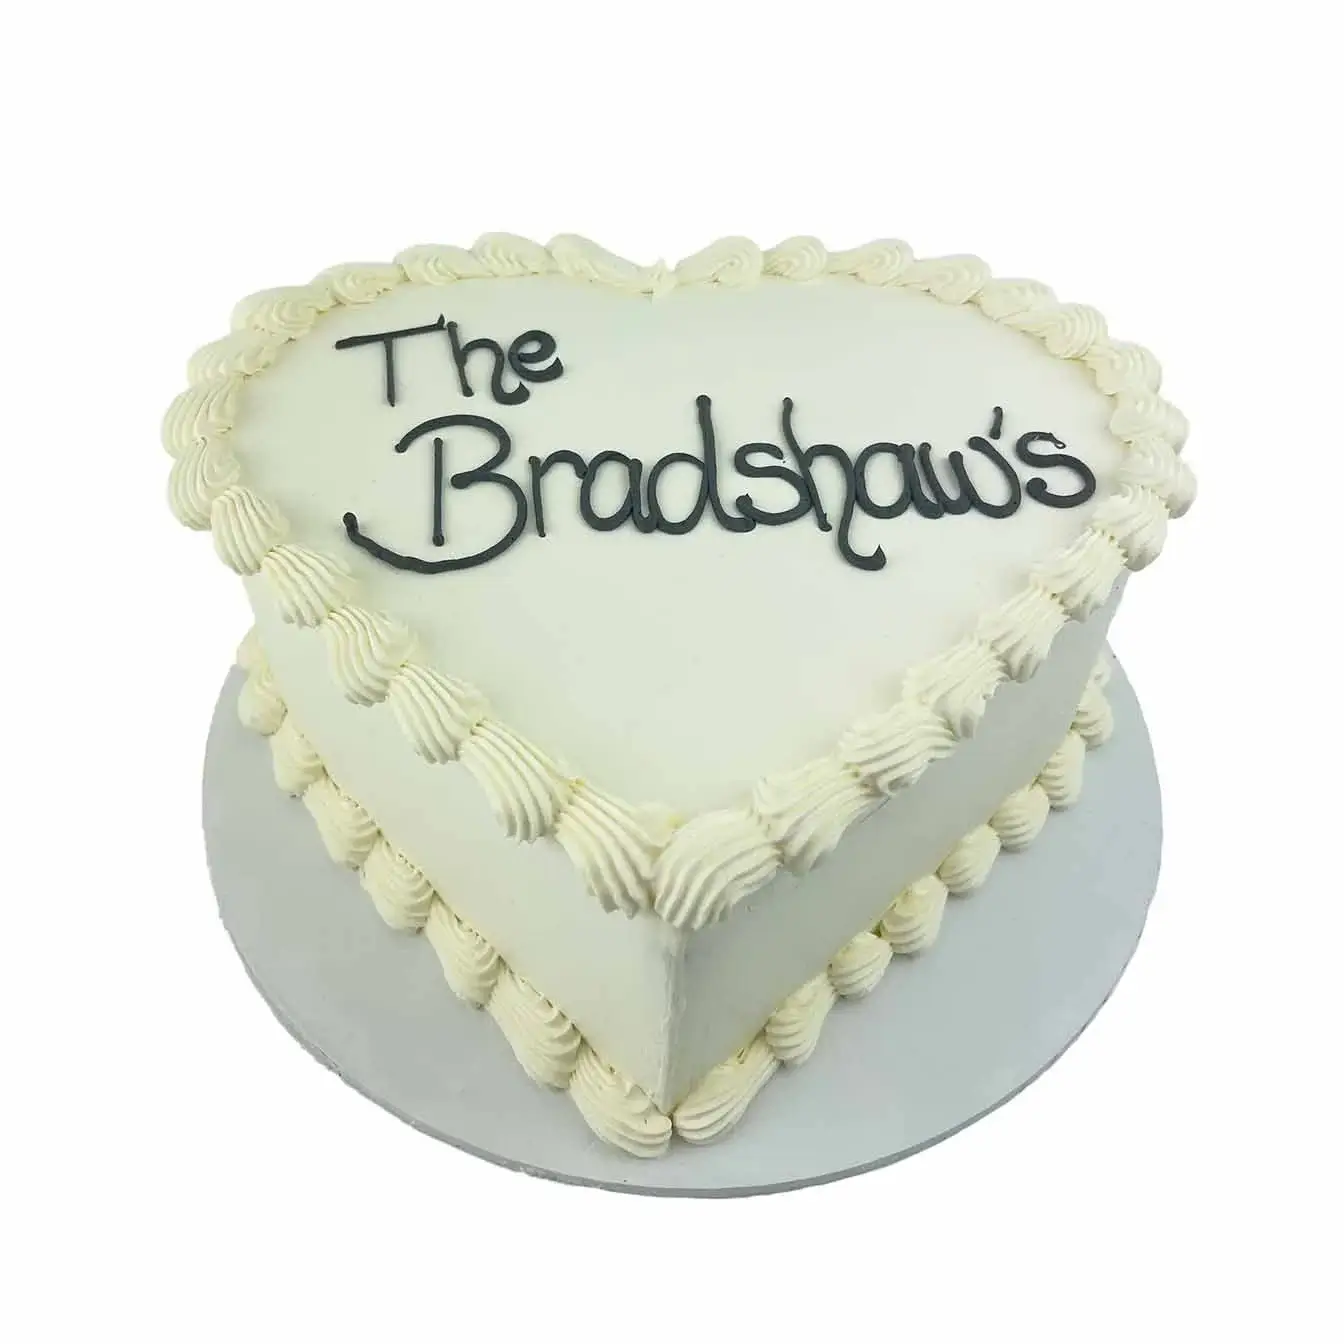 Rustic Heart Wedding Bliss Cake - Classic white icing with intricate white piping and rustic heart motif, personalized with custom writing, a timeless choice for a romantic wedding celebration.